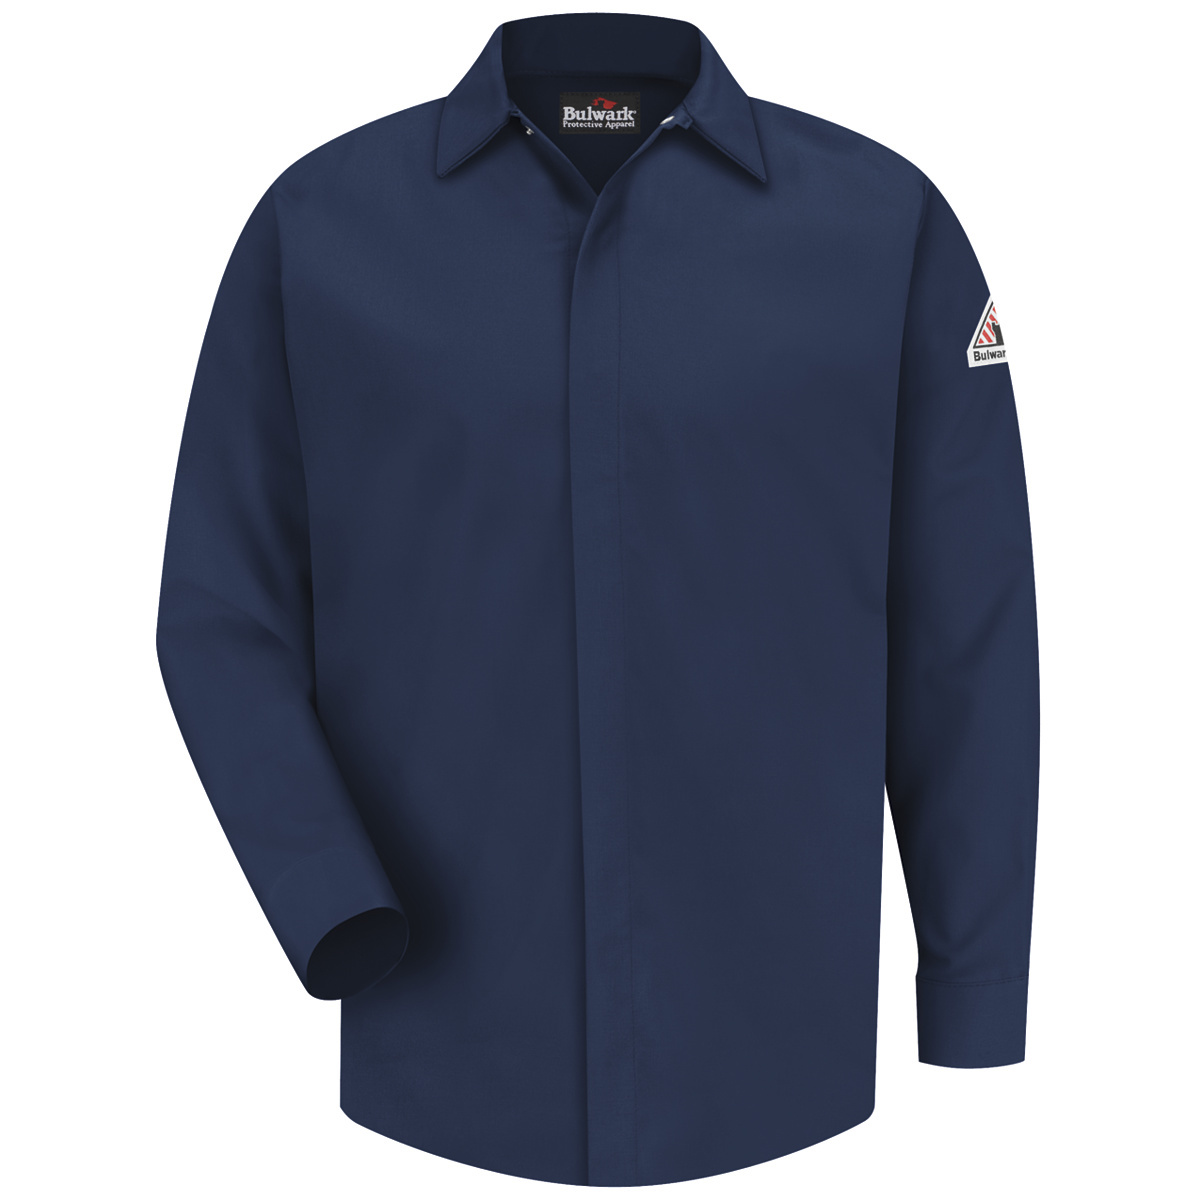 Bulwark® Medium Tall Navy Blue CoolTouch®/Modacrylic/Lyocell/Aramid Flame Resistant Work Shirt With Gripper Front Closure